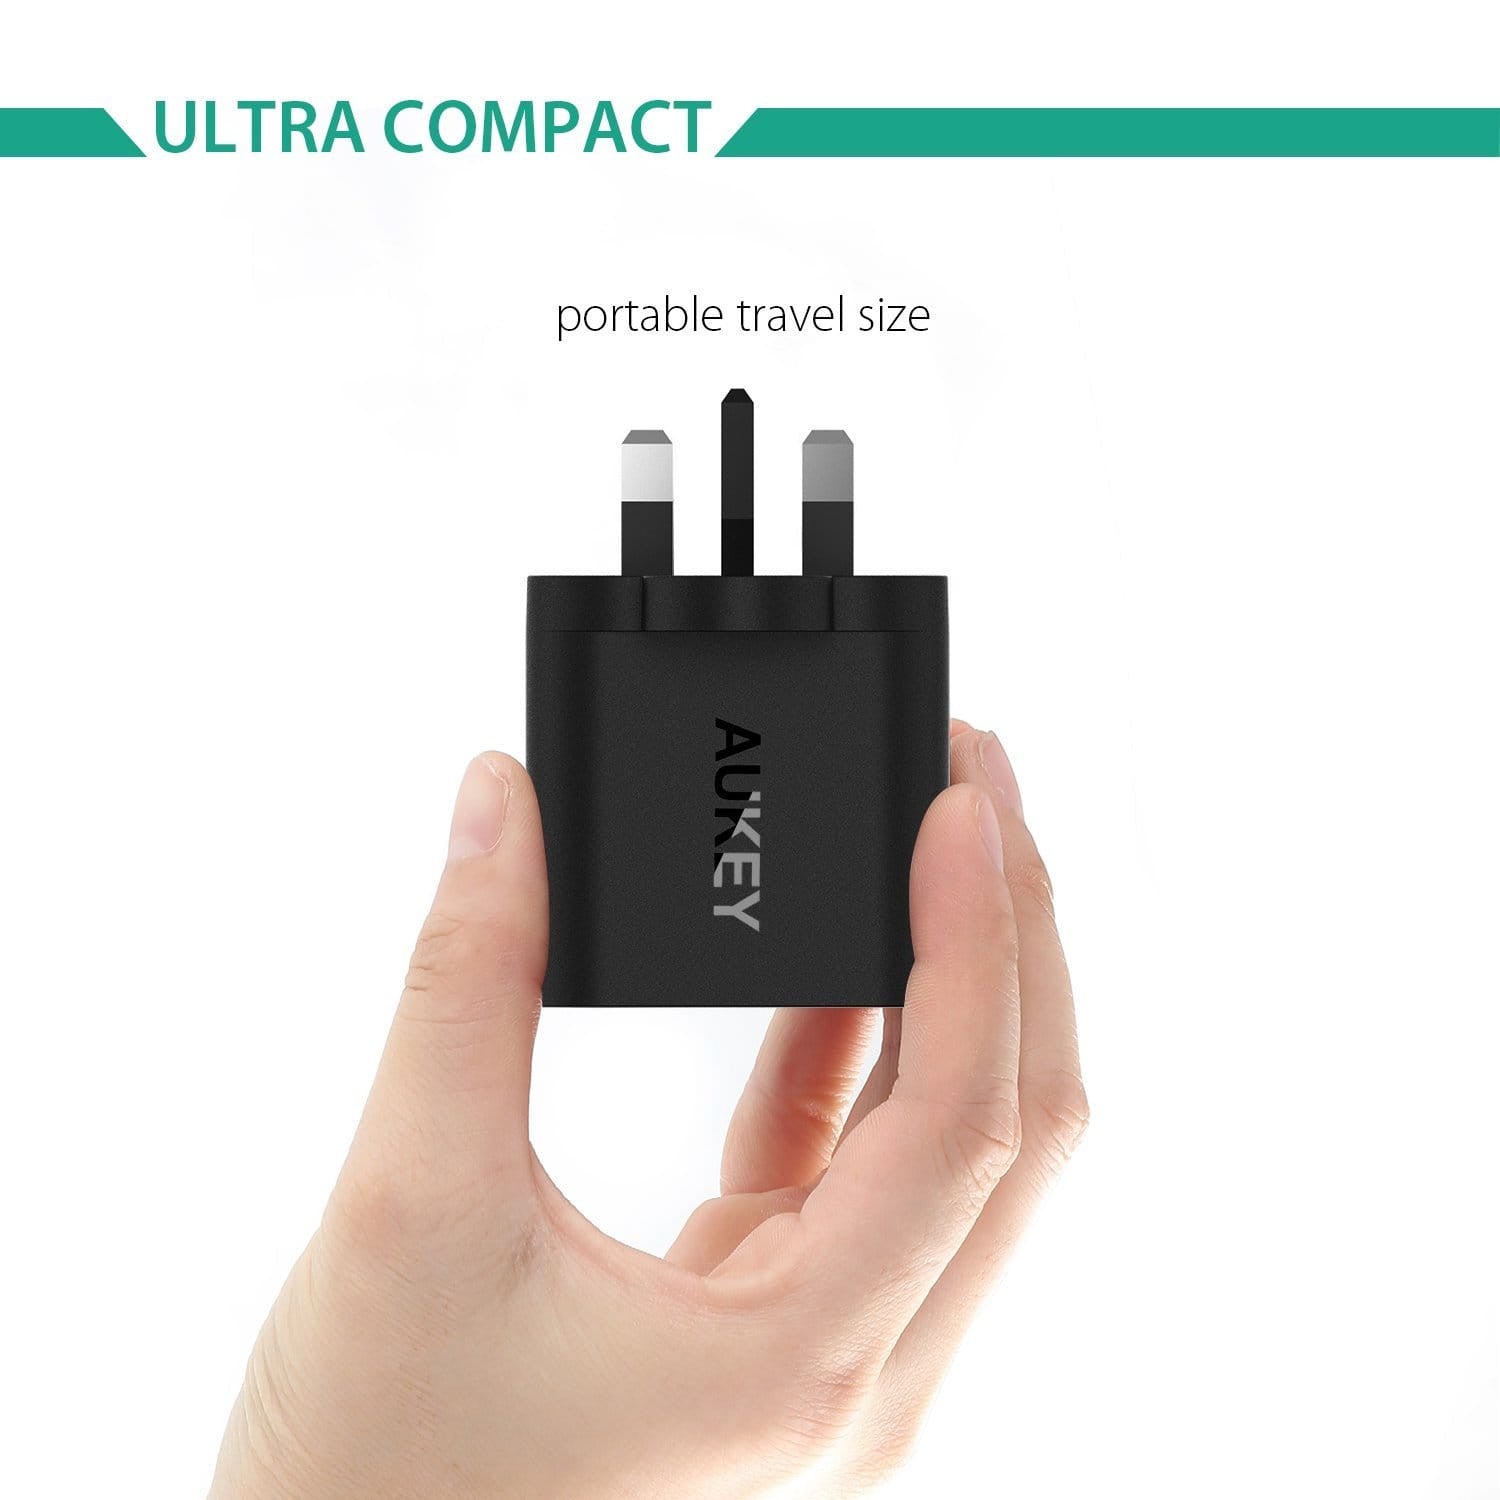 AUKEY PA-T9 19.5W Qualcomm Quick Charge 3.0 USB Travel Wall Charger - Aukey Malaysia Official Store